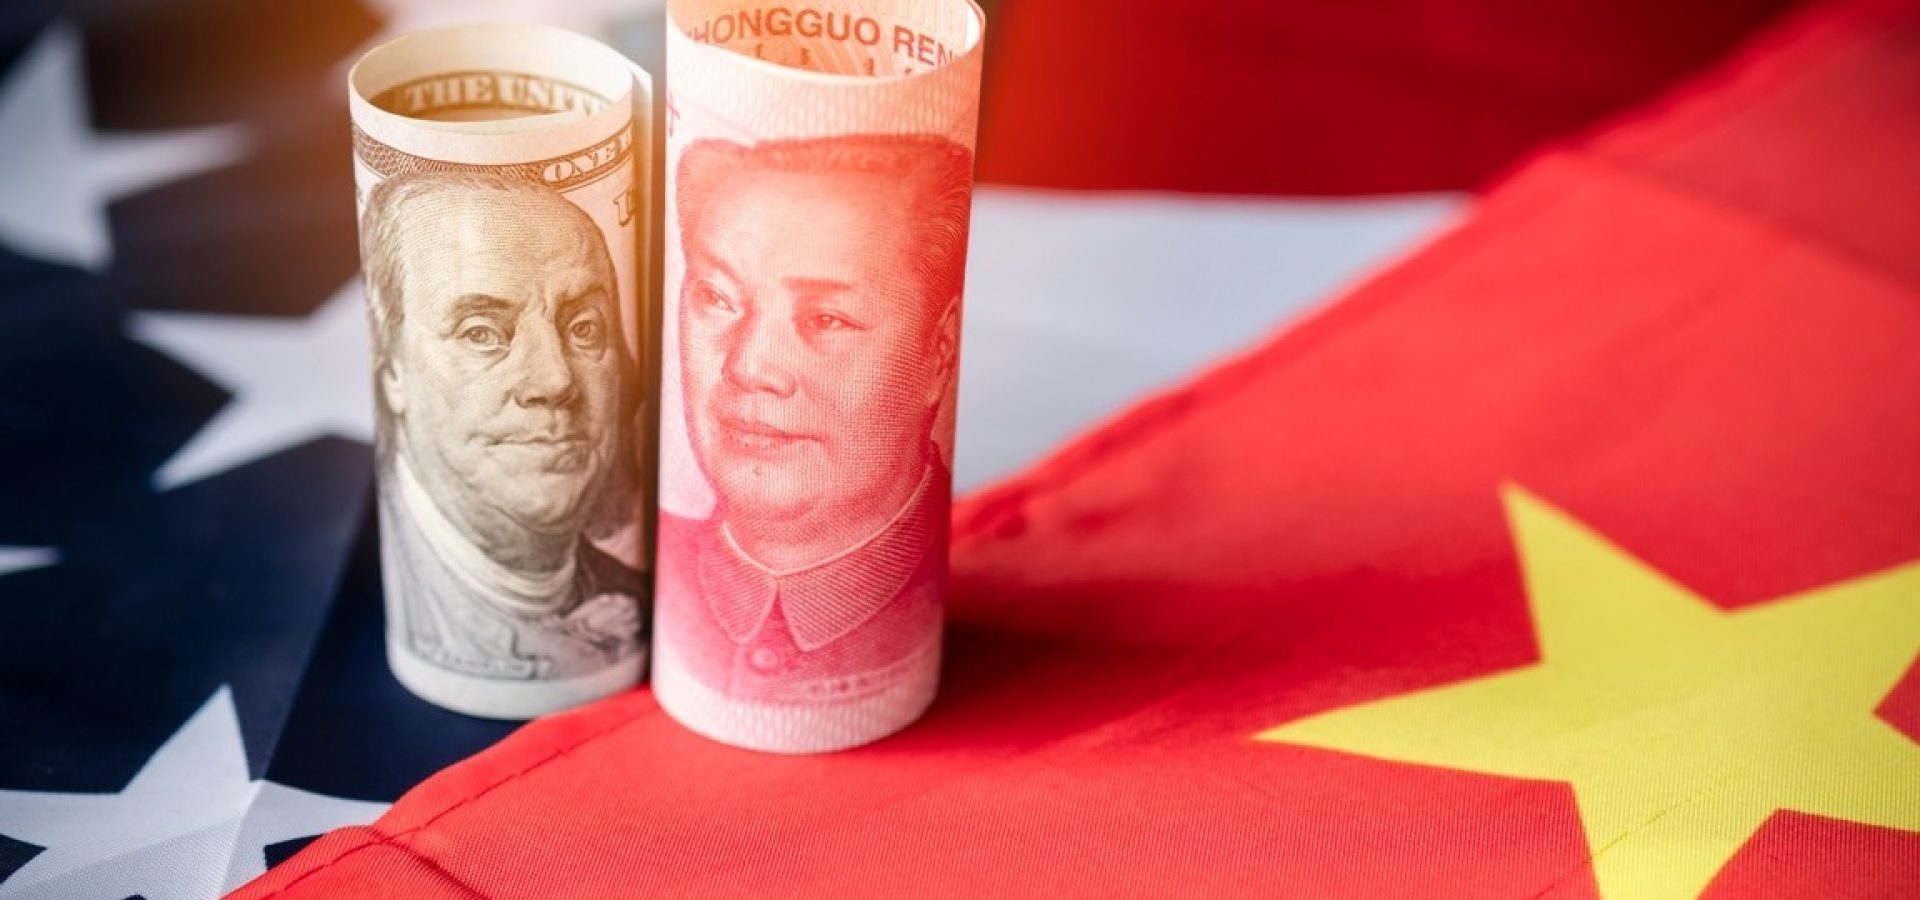 The U.S. dollar declined. What about the Chinese Yuan?